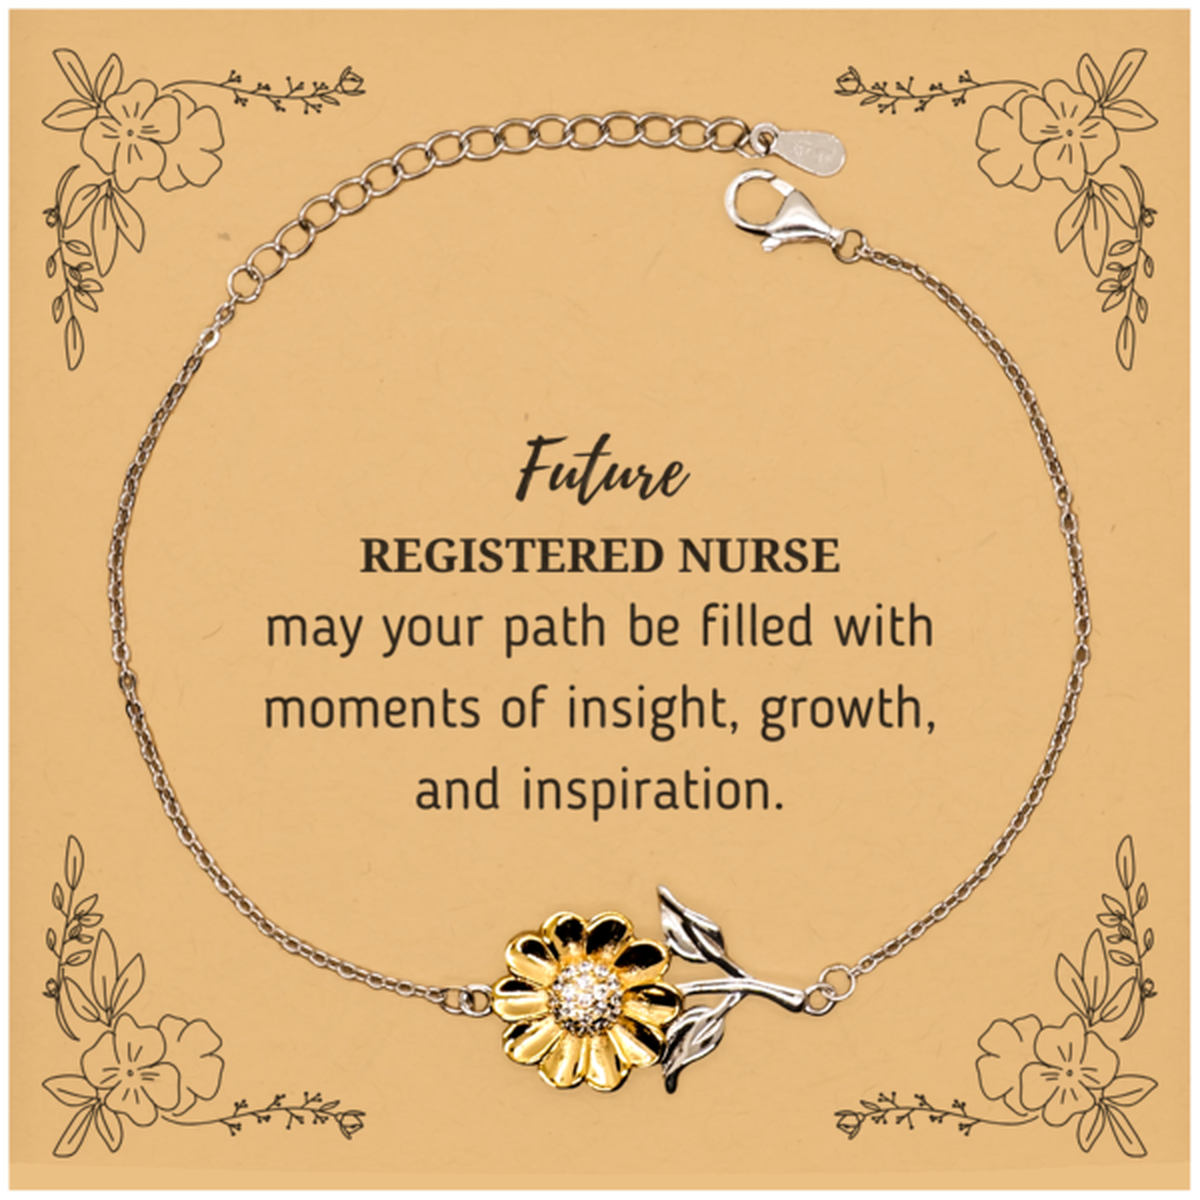 Future Registered Nurse Gifts, May your path be filled with moments of insight, Graduation Gifts for New Registered Nurse, Christmas Unique Sunflower Bracelet For Men, Women, Friends